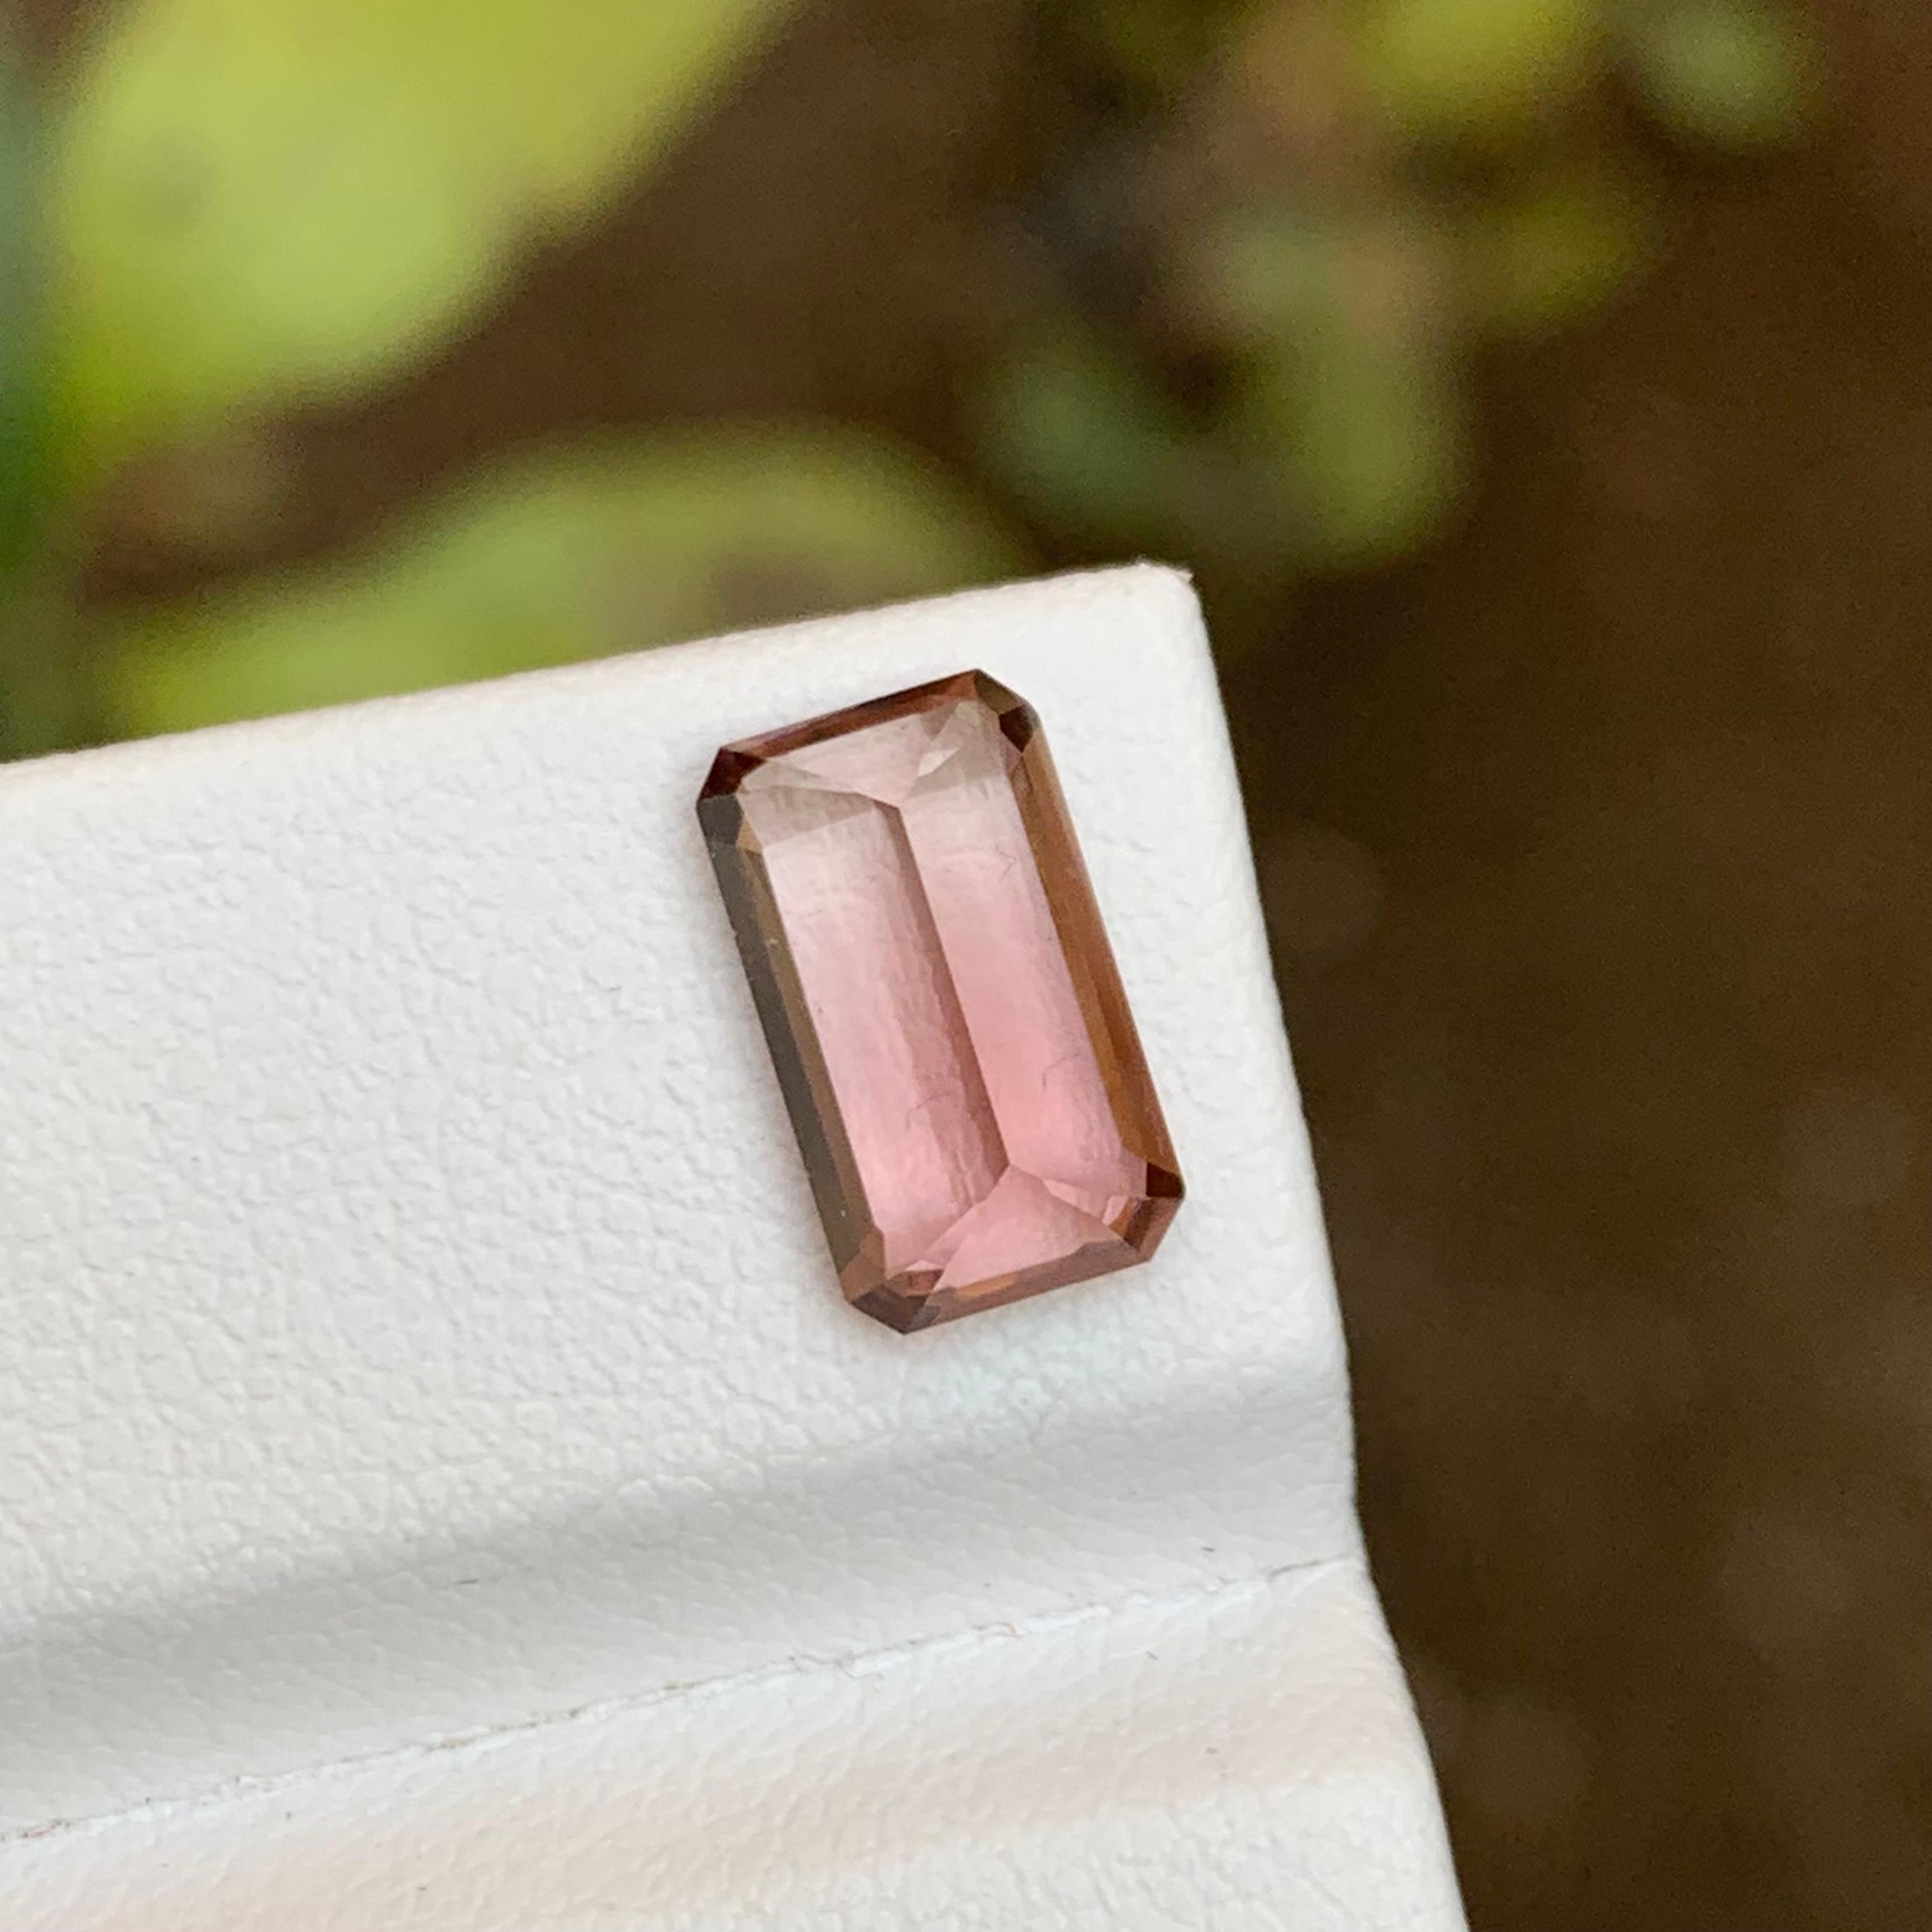 Women's or Men's Rare Pink Natural Tourmaline Loose Gemstone 2.45 Ct Emerald Cut for Ring/Pendant For Sale